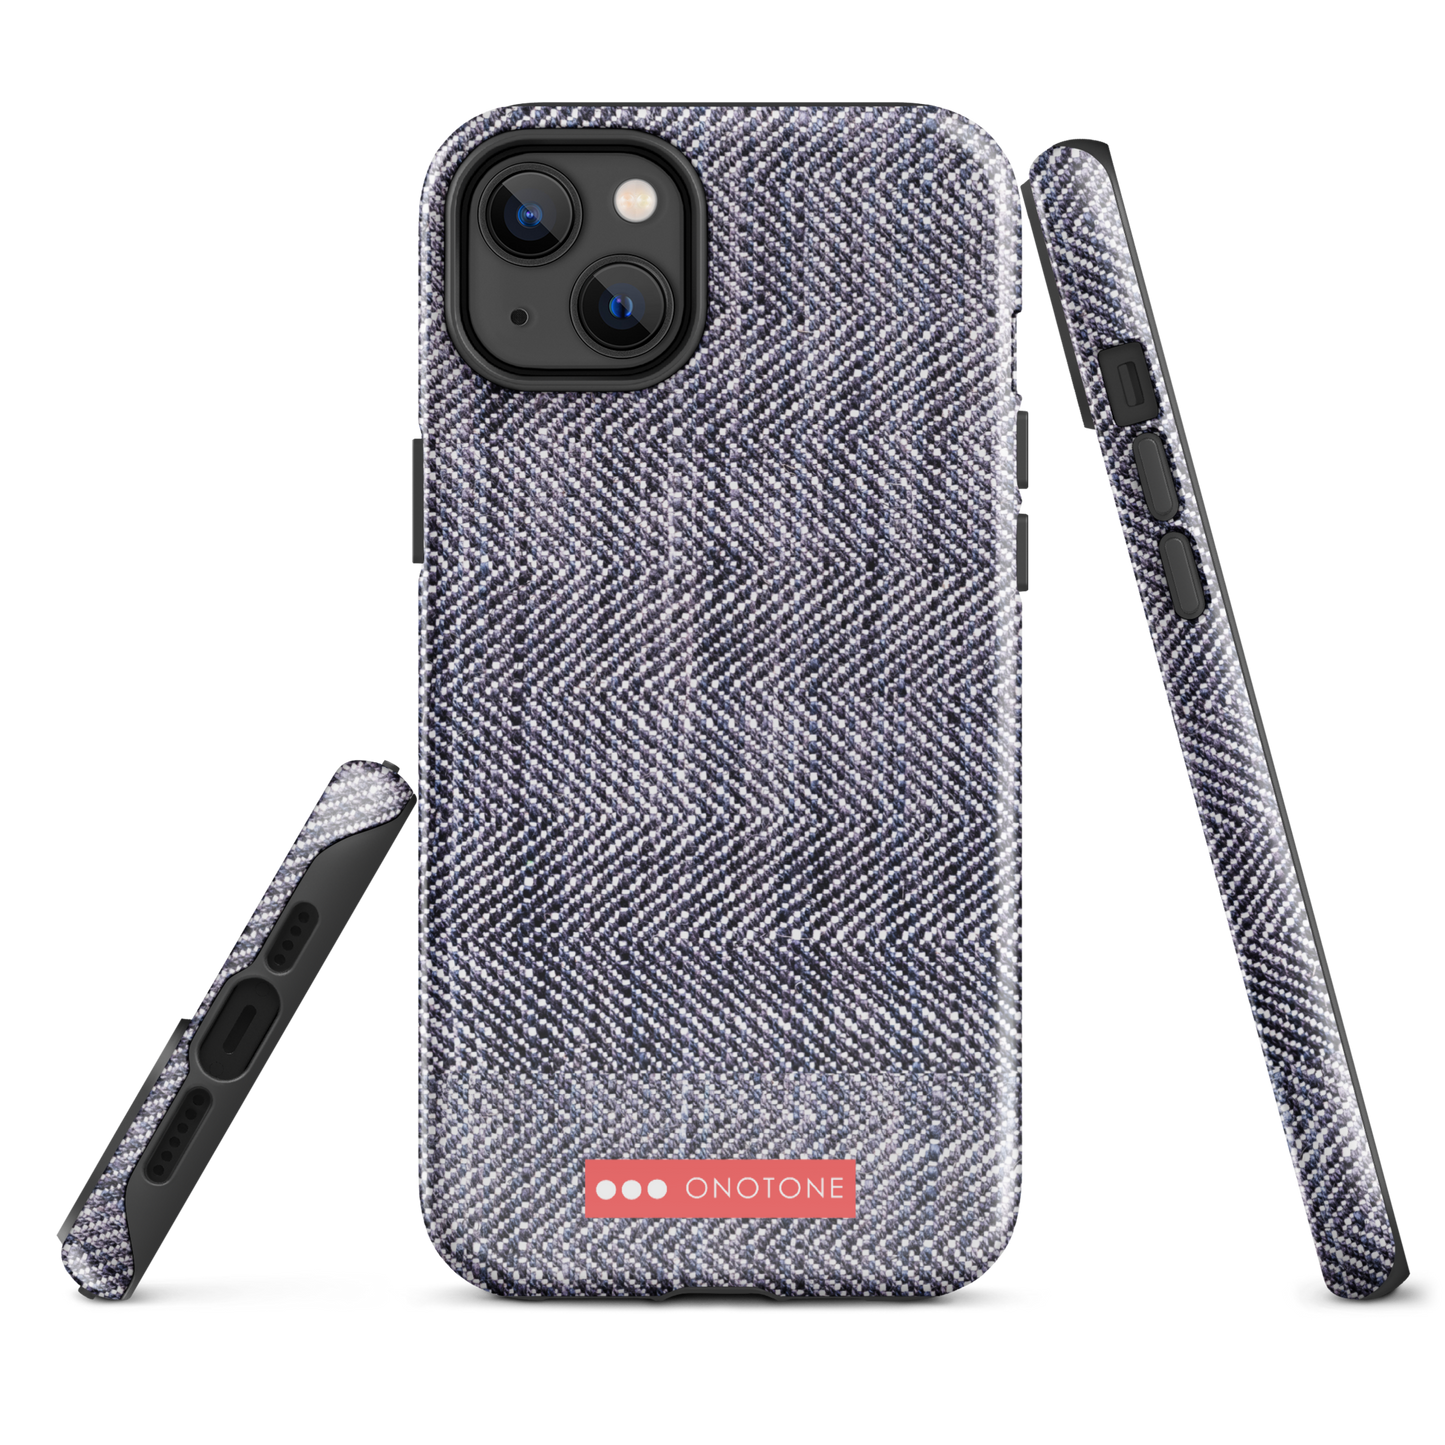 Japanese iPhone® Case with traditional Indigo patterns